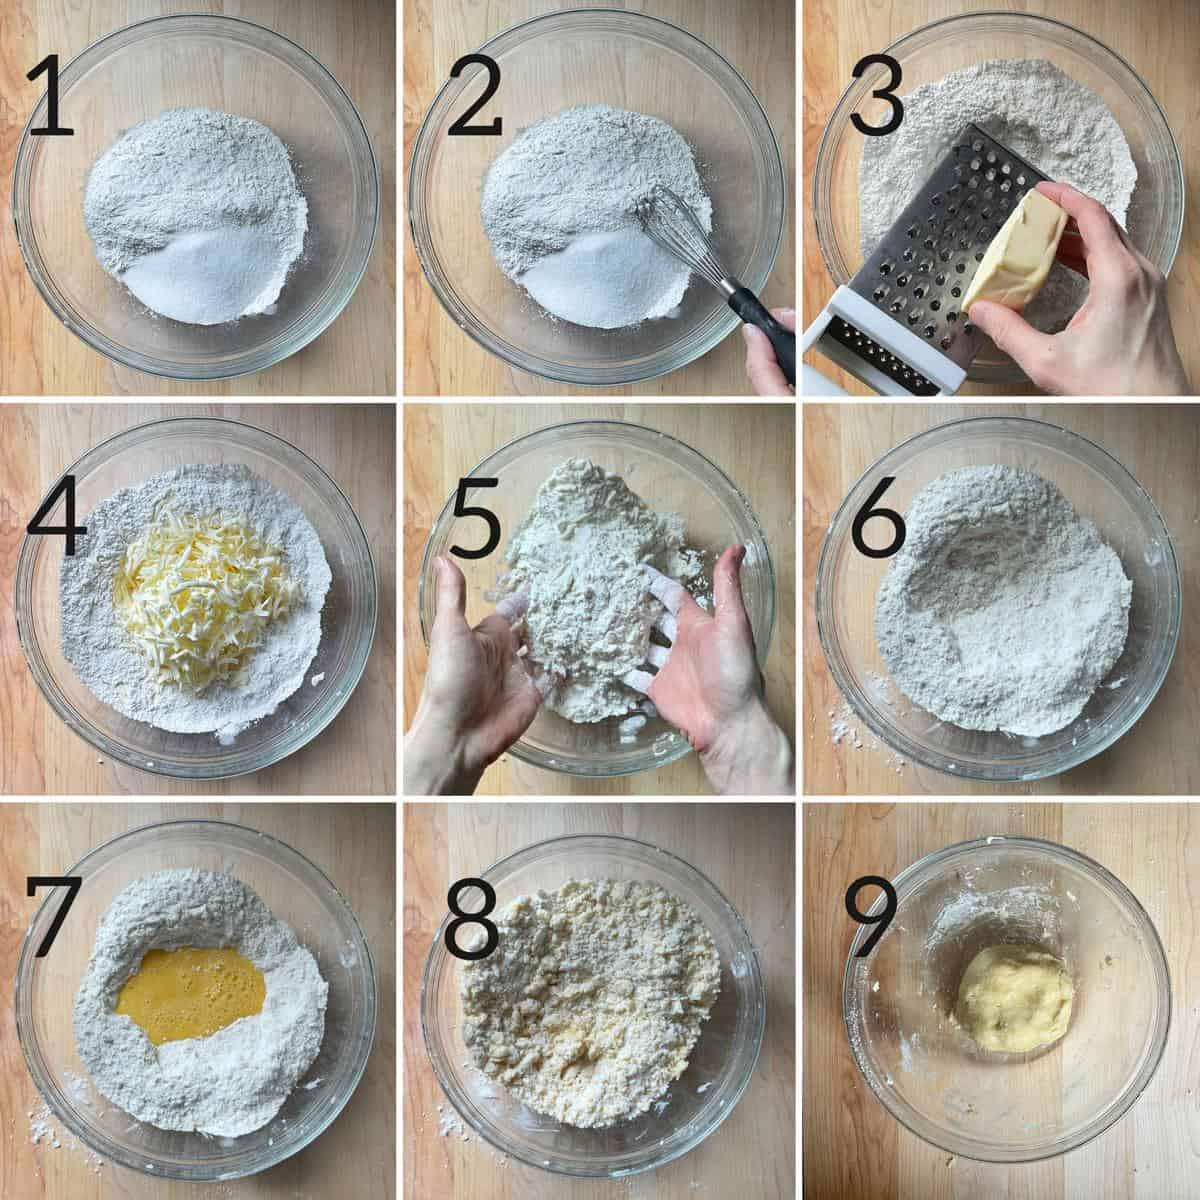 Process shots showing how to make Italian shortcrust pastry by hand.